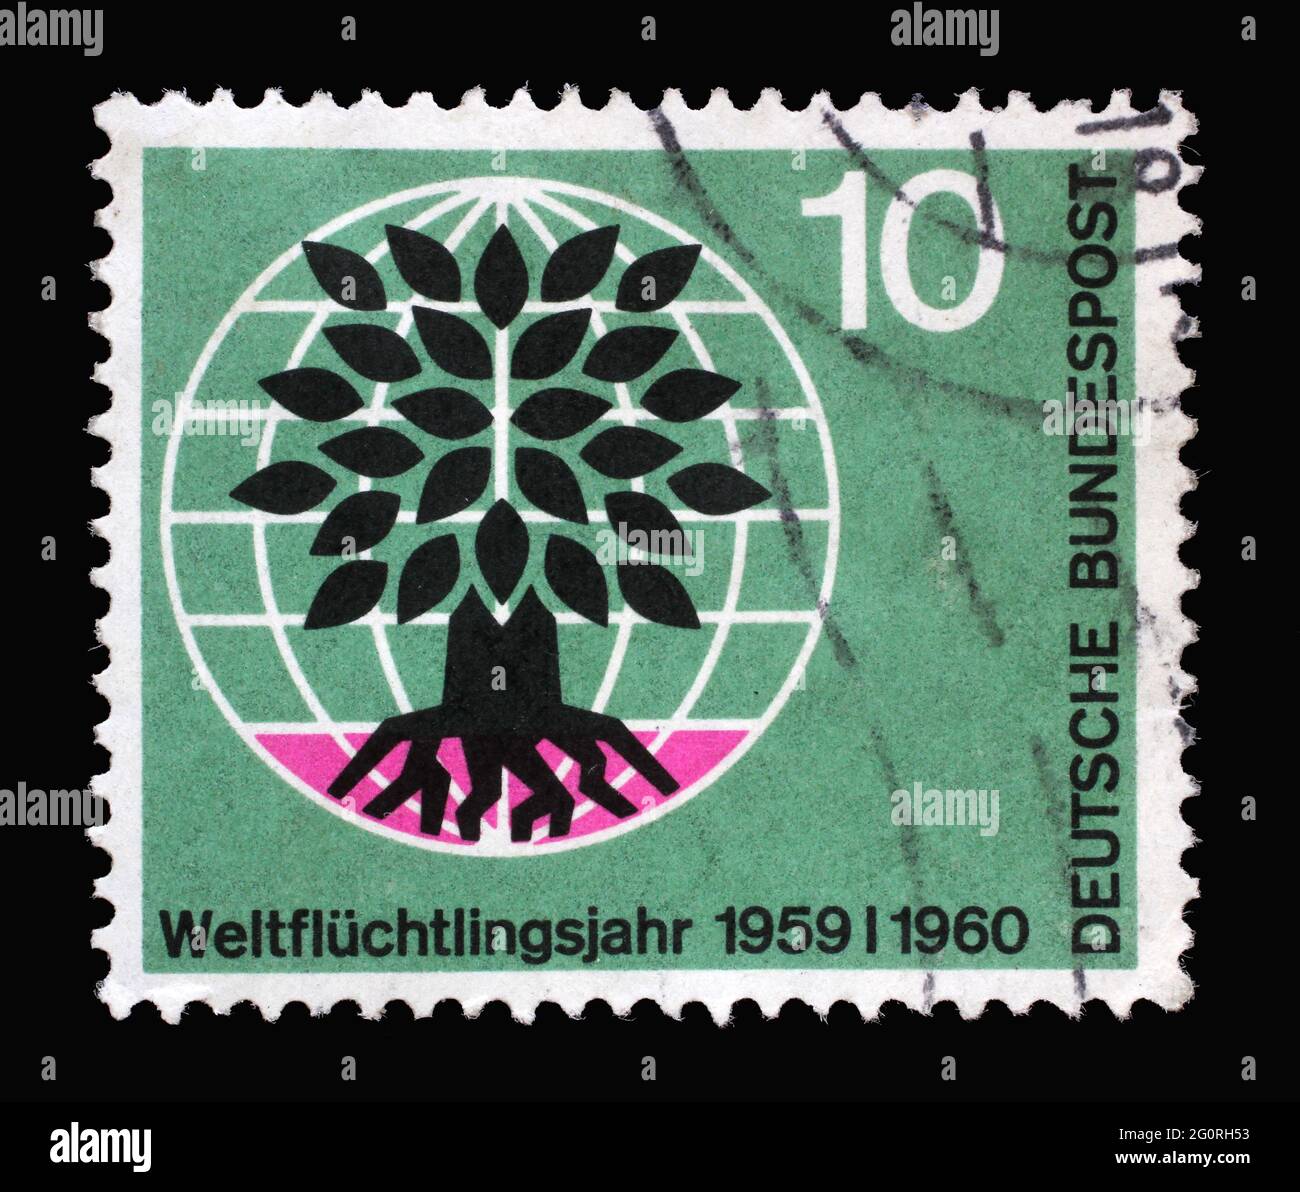 Stamp printed in Germany showing a stylized tree in a globe. World Refugee Year, circa 1960 Stock Photo